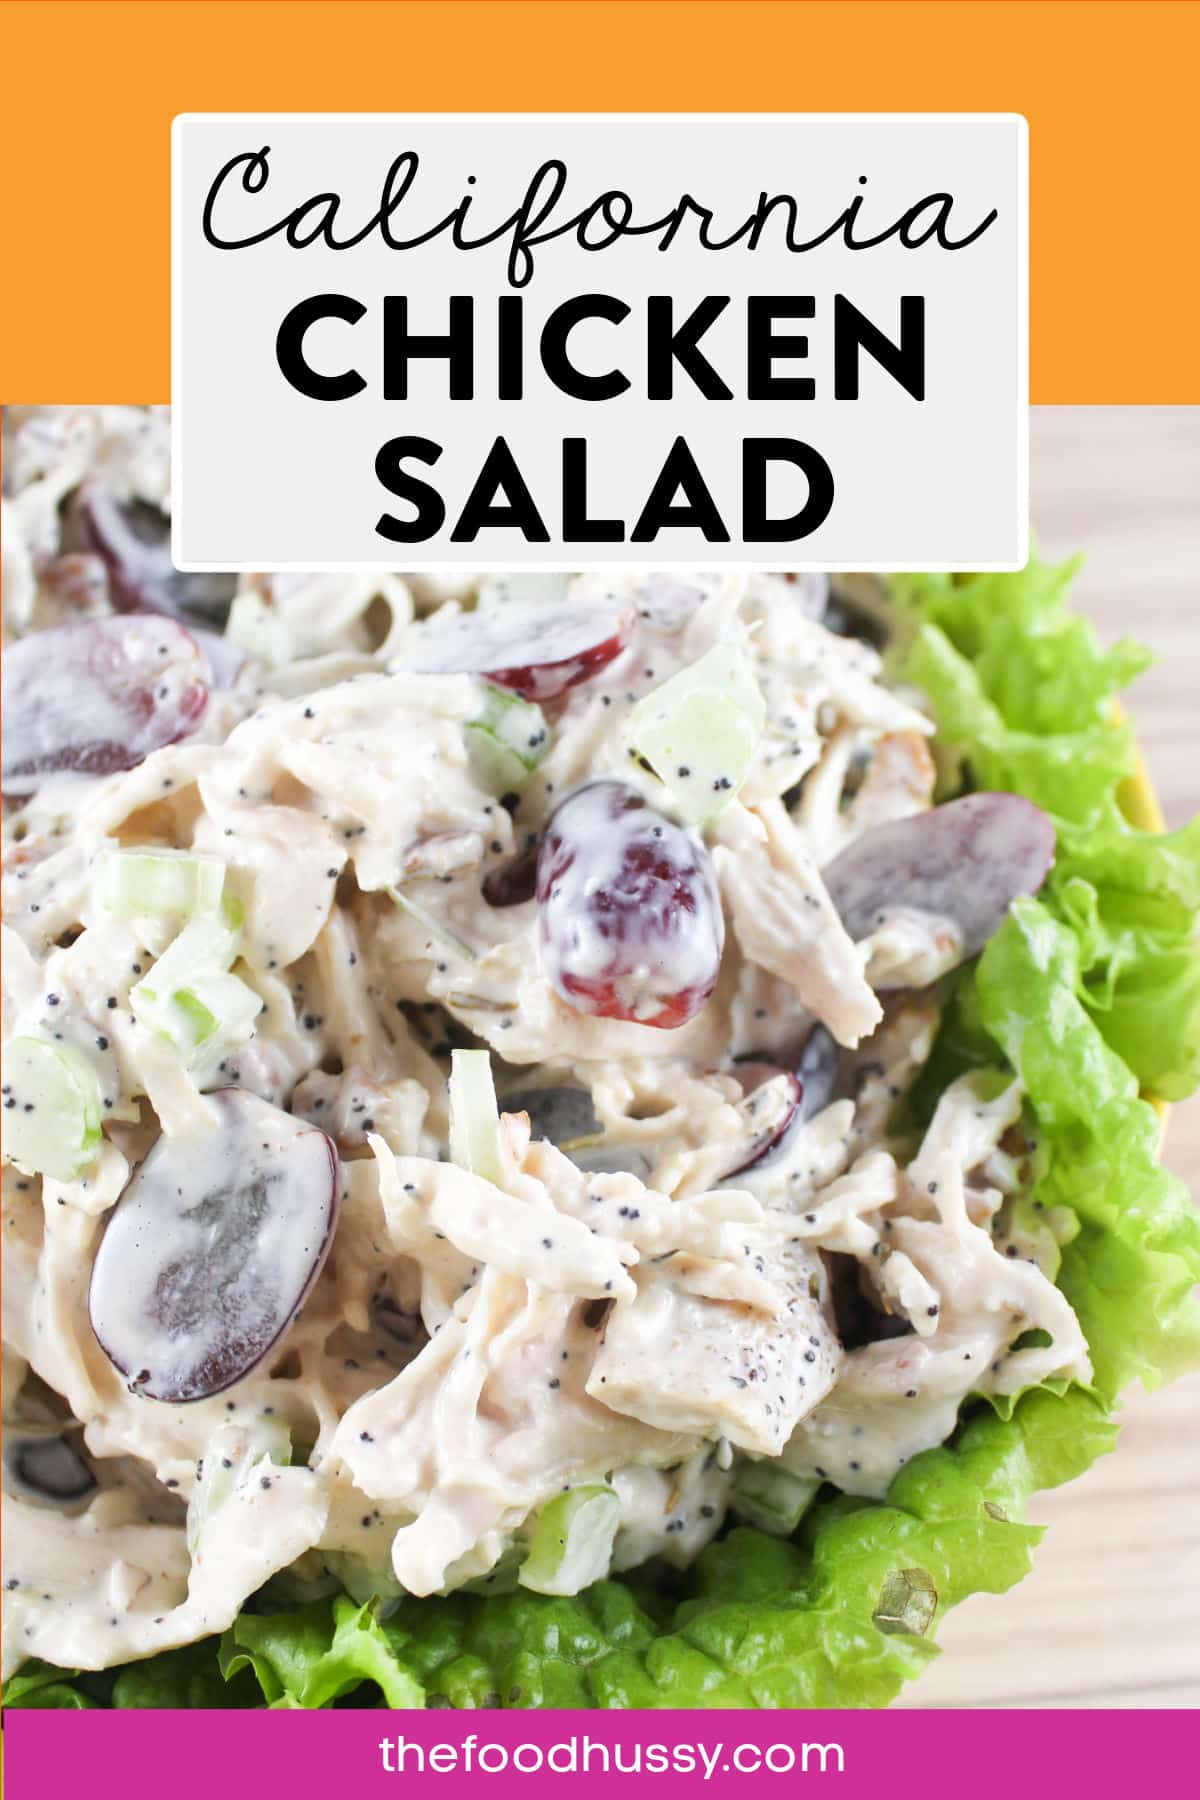 This California Chicken Salad tastes just like the Sonoma Chicken Salad at Whole Foods! It's creamy and crunchy all at the same time with diced celery, red grapes and chopped pecans!
 via @foodhussy